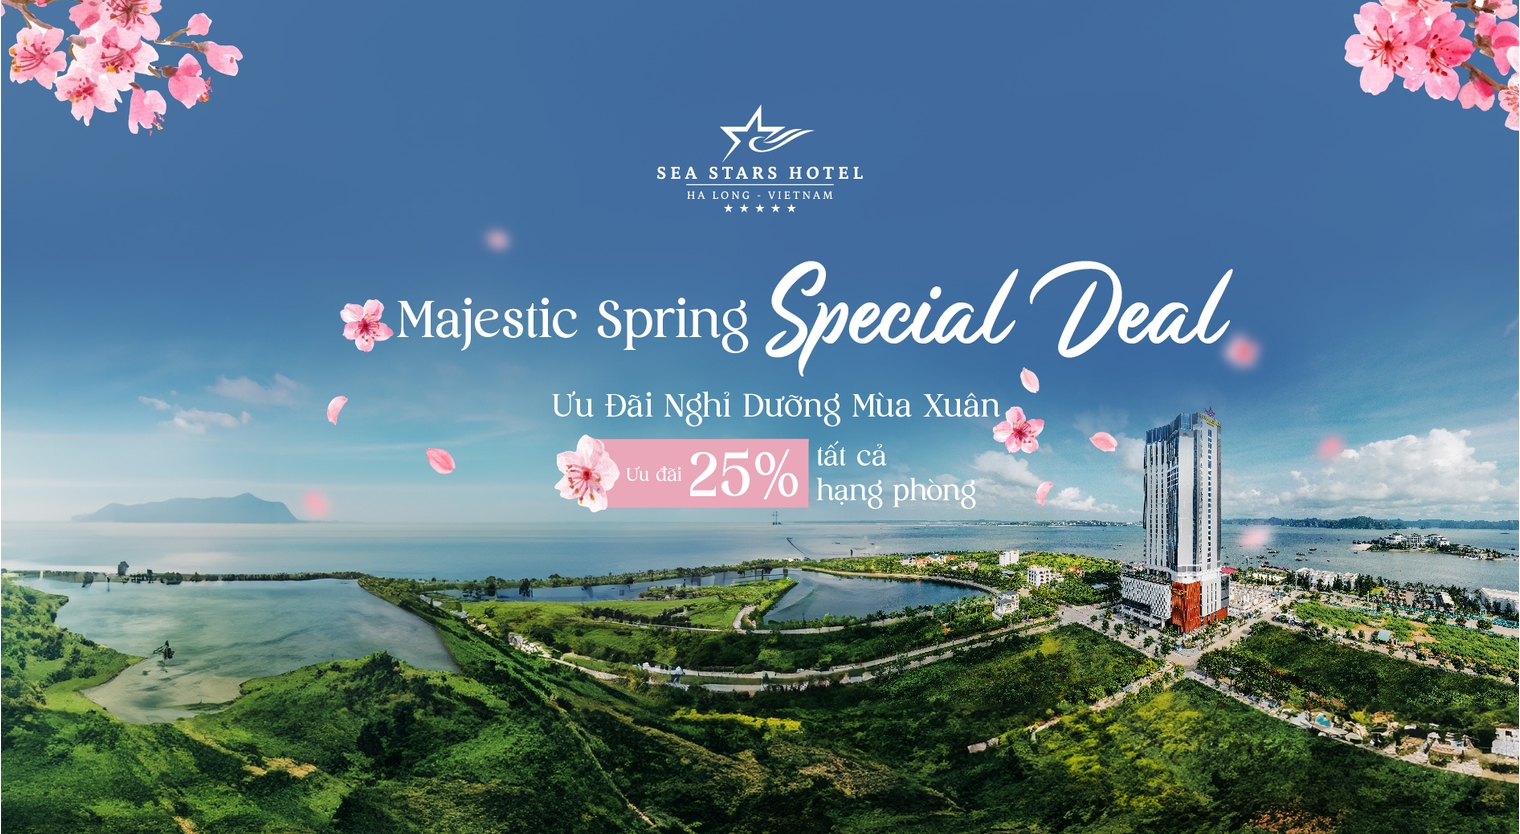 Majestic Spring Special Deal